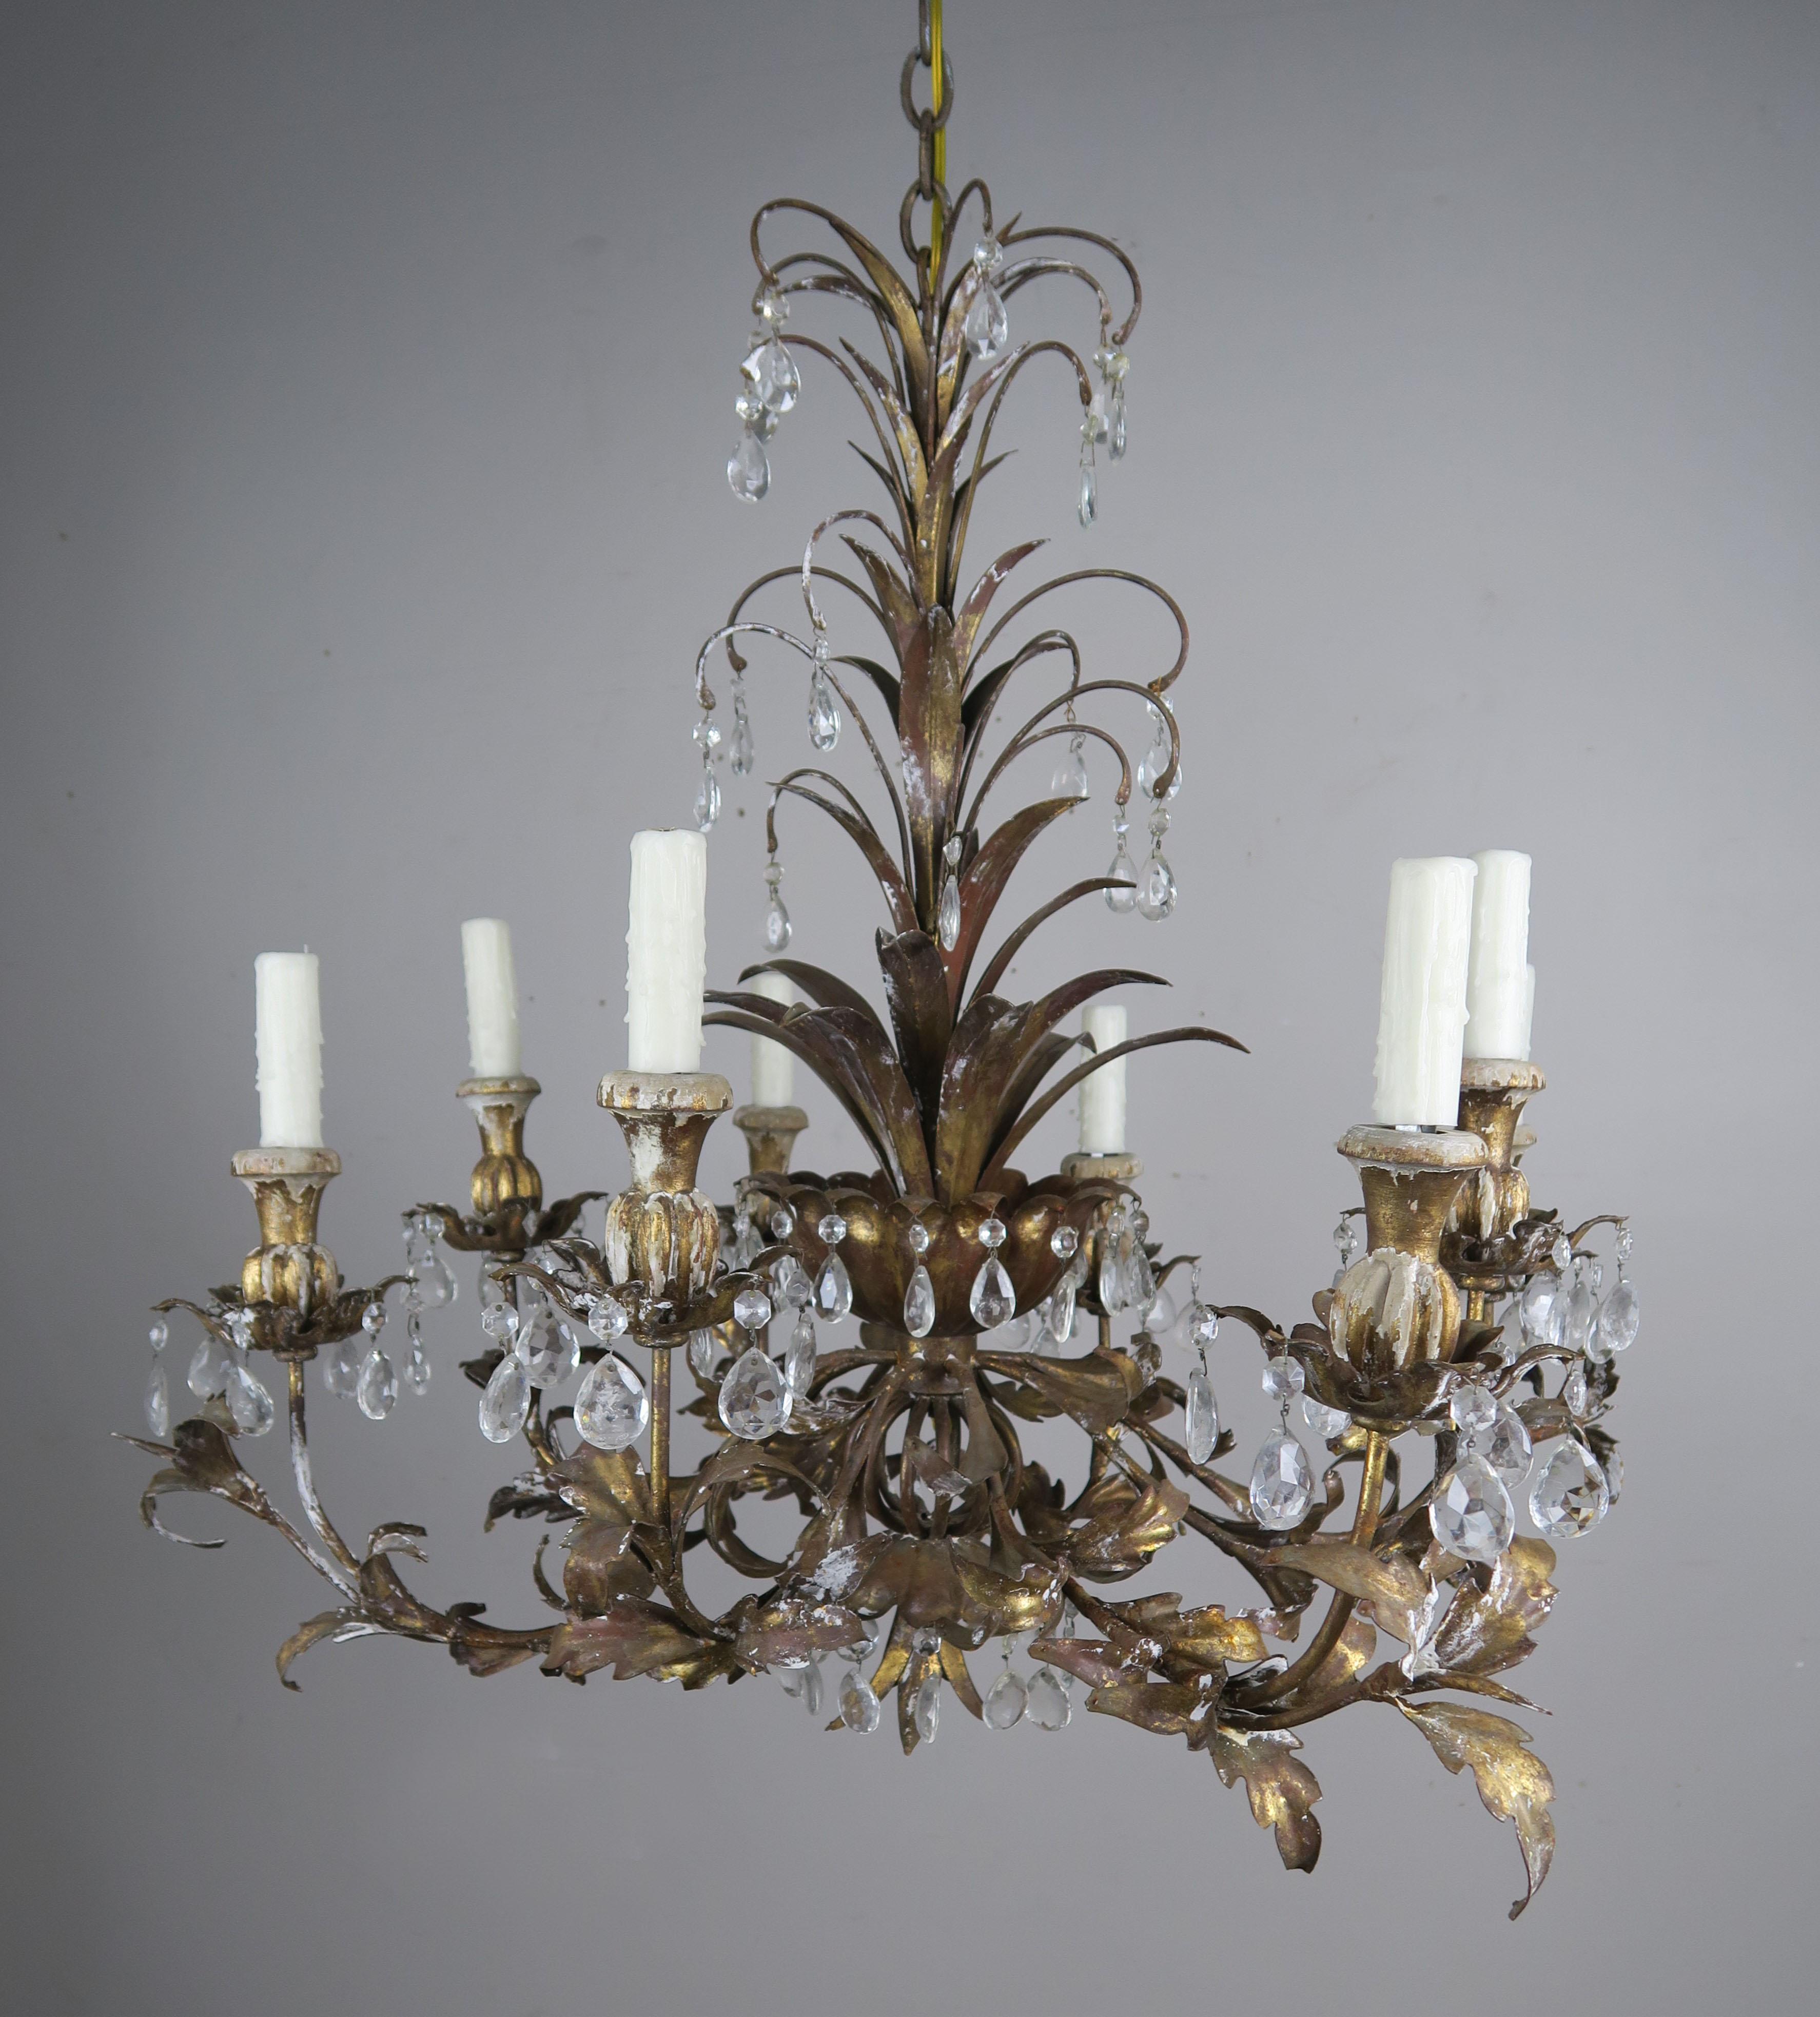 Italian gilt metal and wood (8) light chandelier adorned with almond shaped crystals throughout. The fixture has been newly rewired with cream colored drip wax candle covers. The fixture includes chain and canopy.